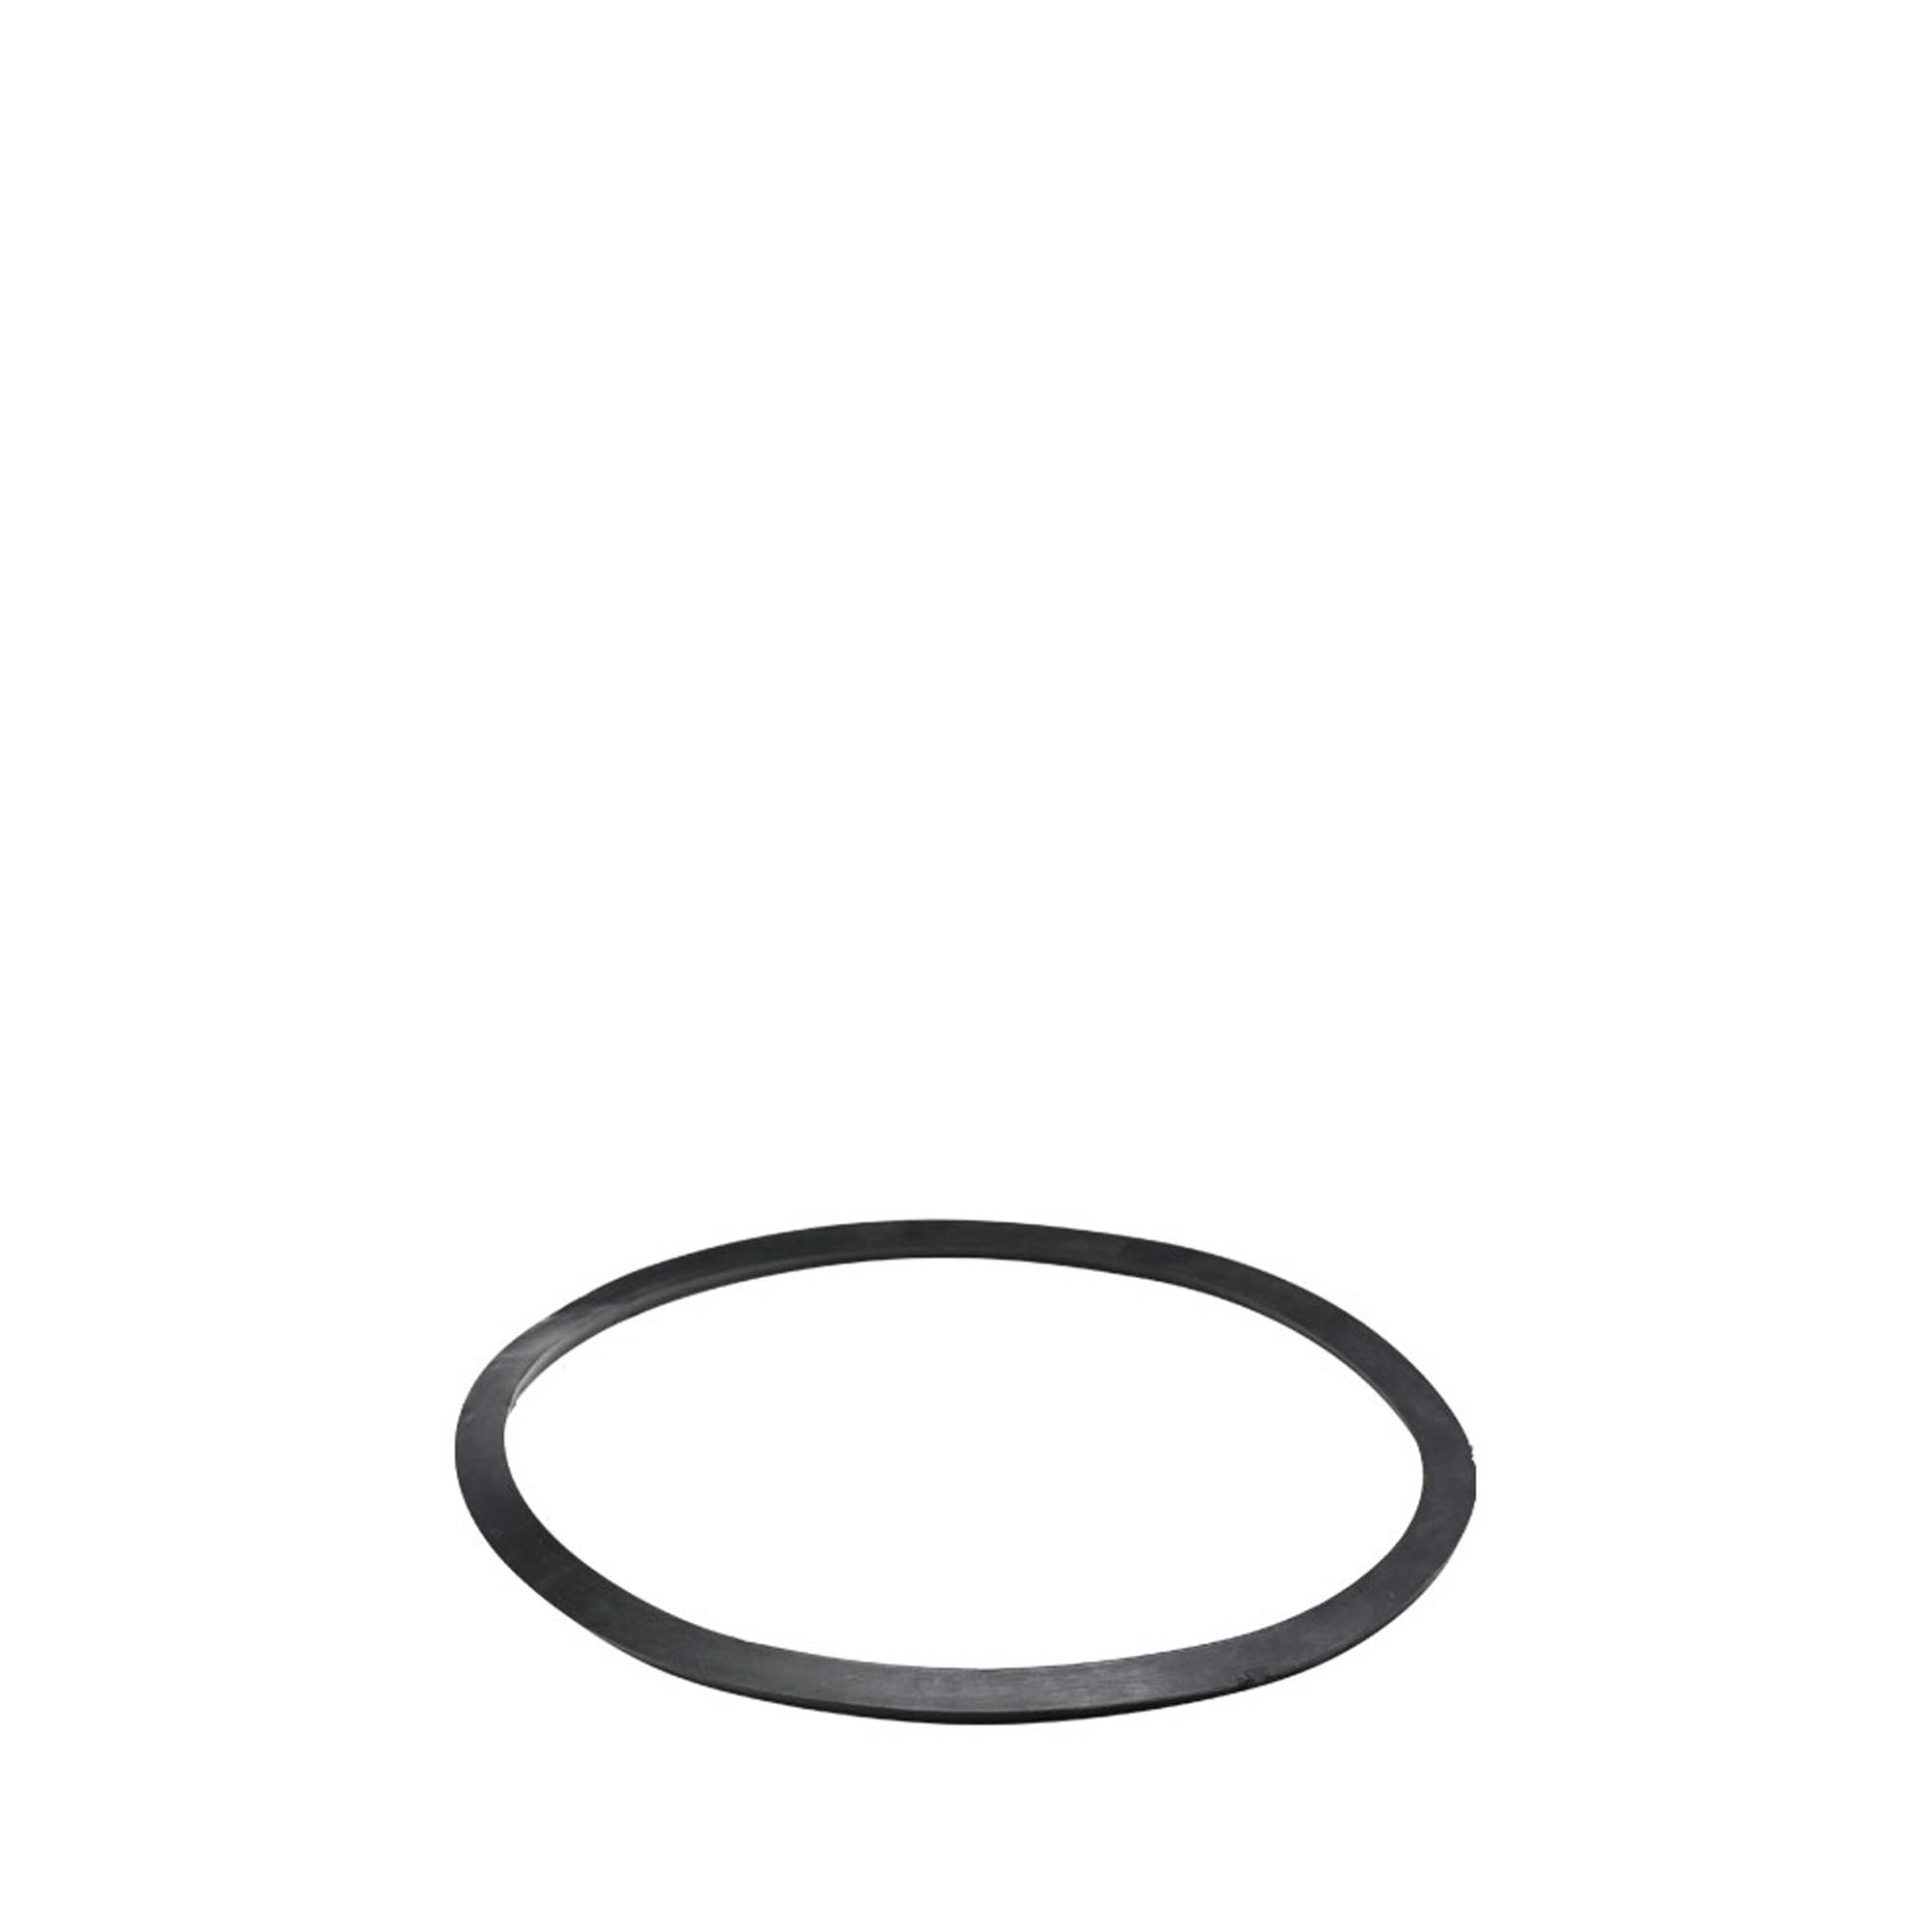 Riess spare parts - rubber ring for seal box round